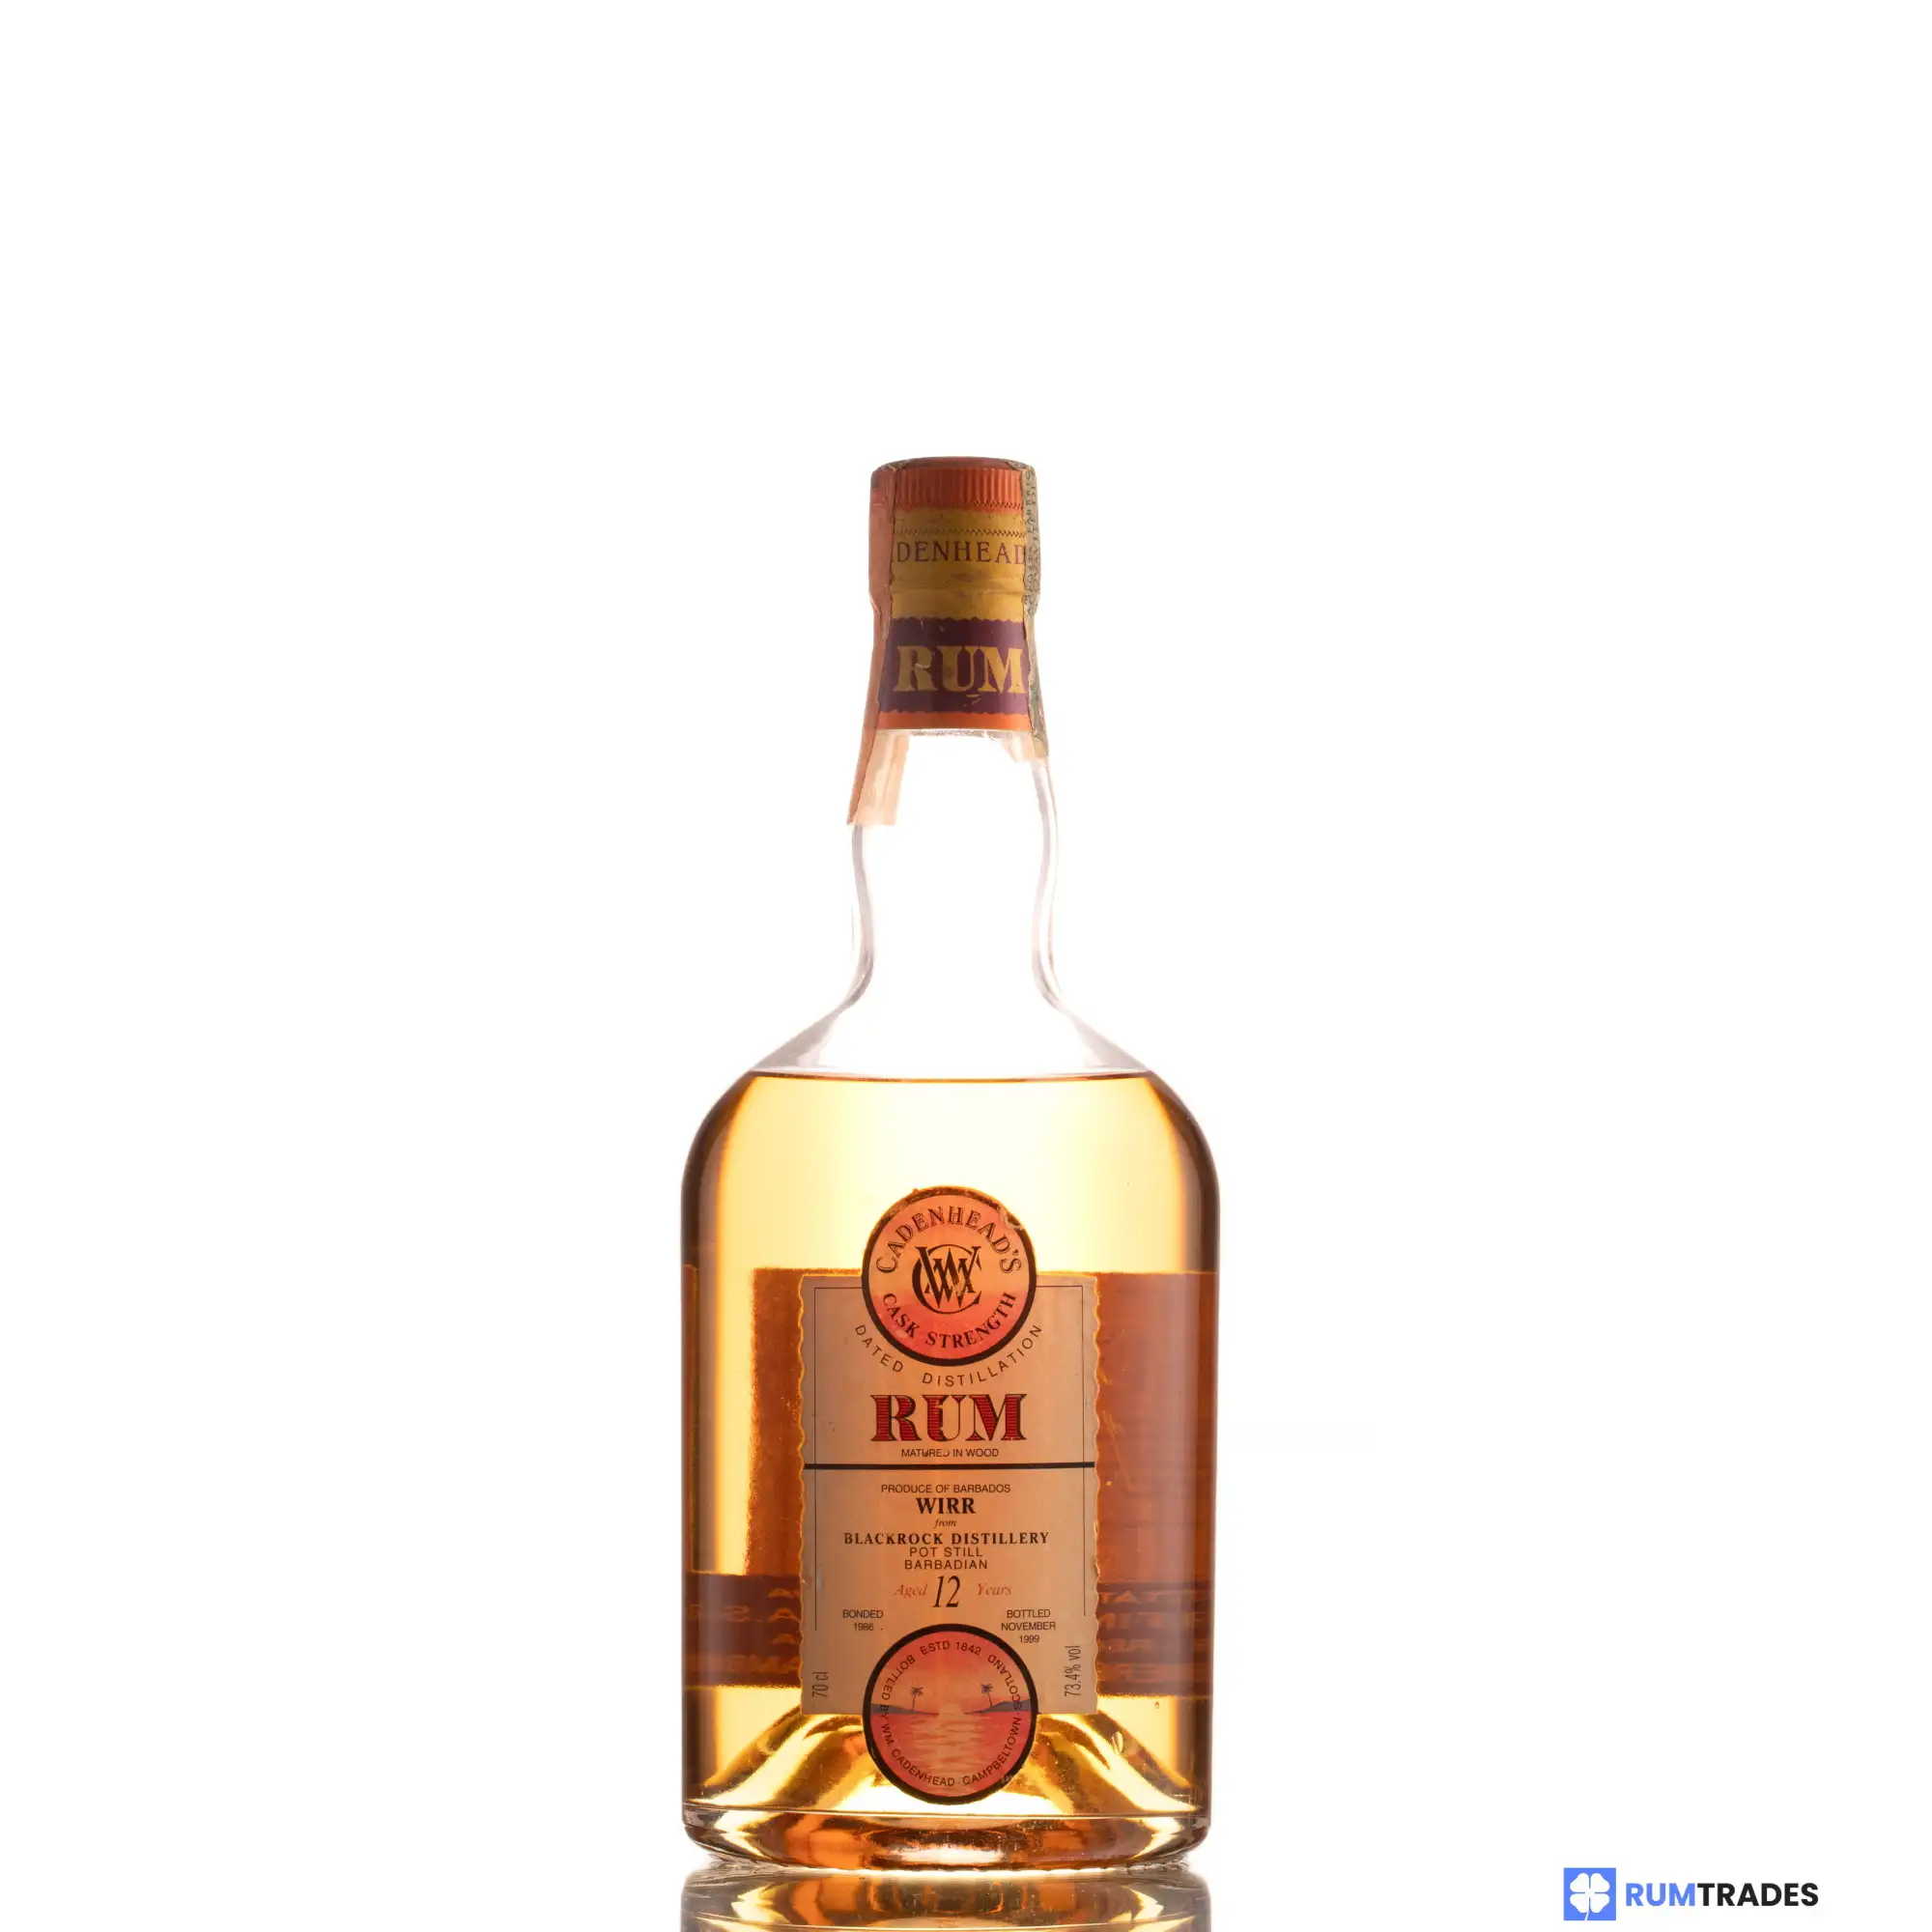 Image of the front of the bottle of the rum WIRR